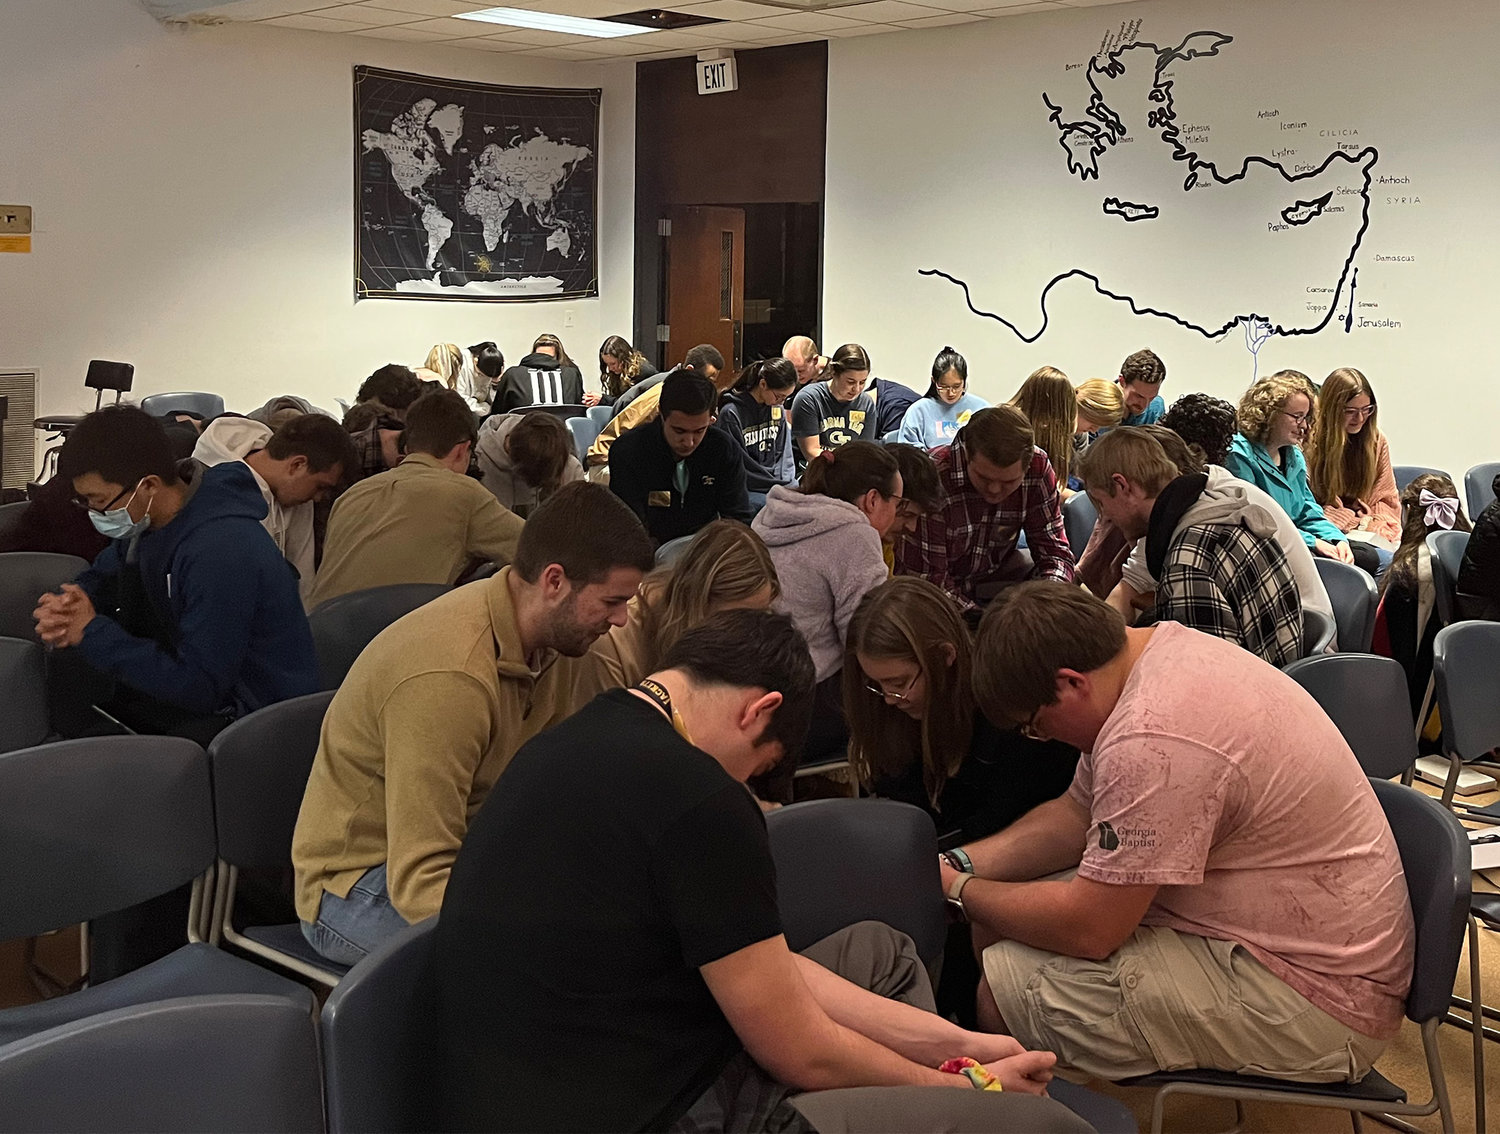 Students pray during a Collegiate Day of Prayer event at Georgia Tech, Thursday, Feb. 23, 2023.